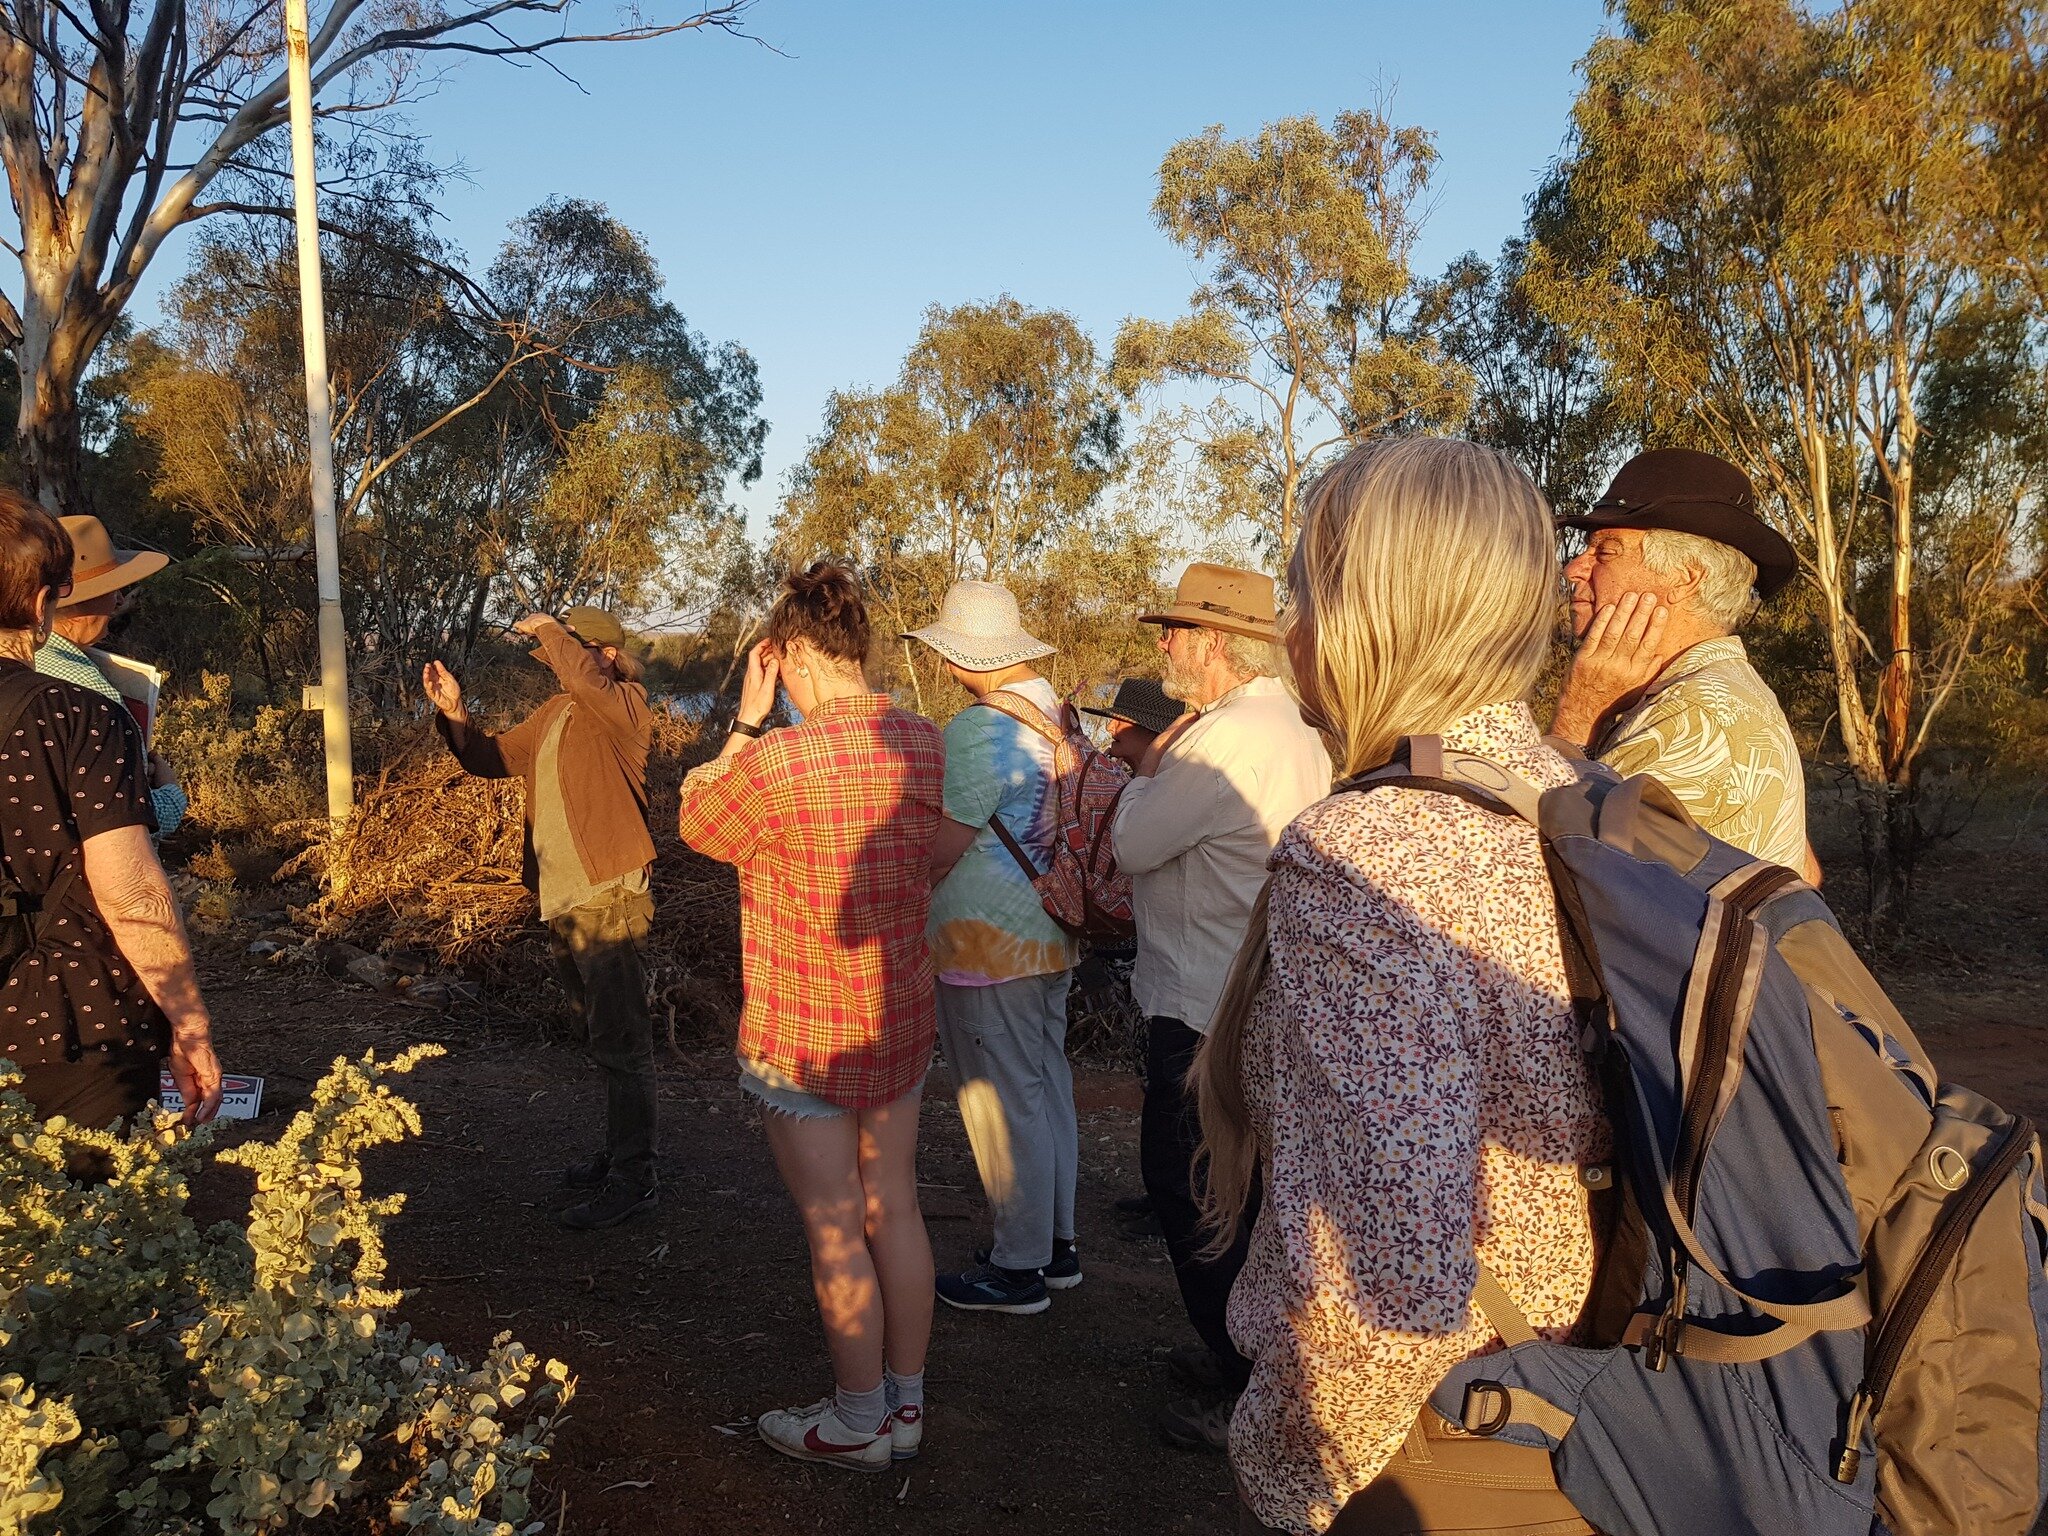 Last week Allan Giddy, the founding director of  the Environmental Research Initiative for Art at UNSW travelled to the Broken Hill Art Exchange to run a series of workshops for local artists on using renewable energy technology in their work. The gr